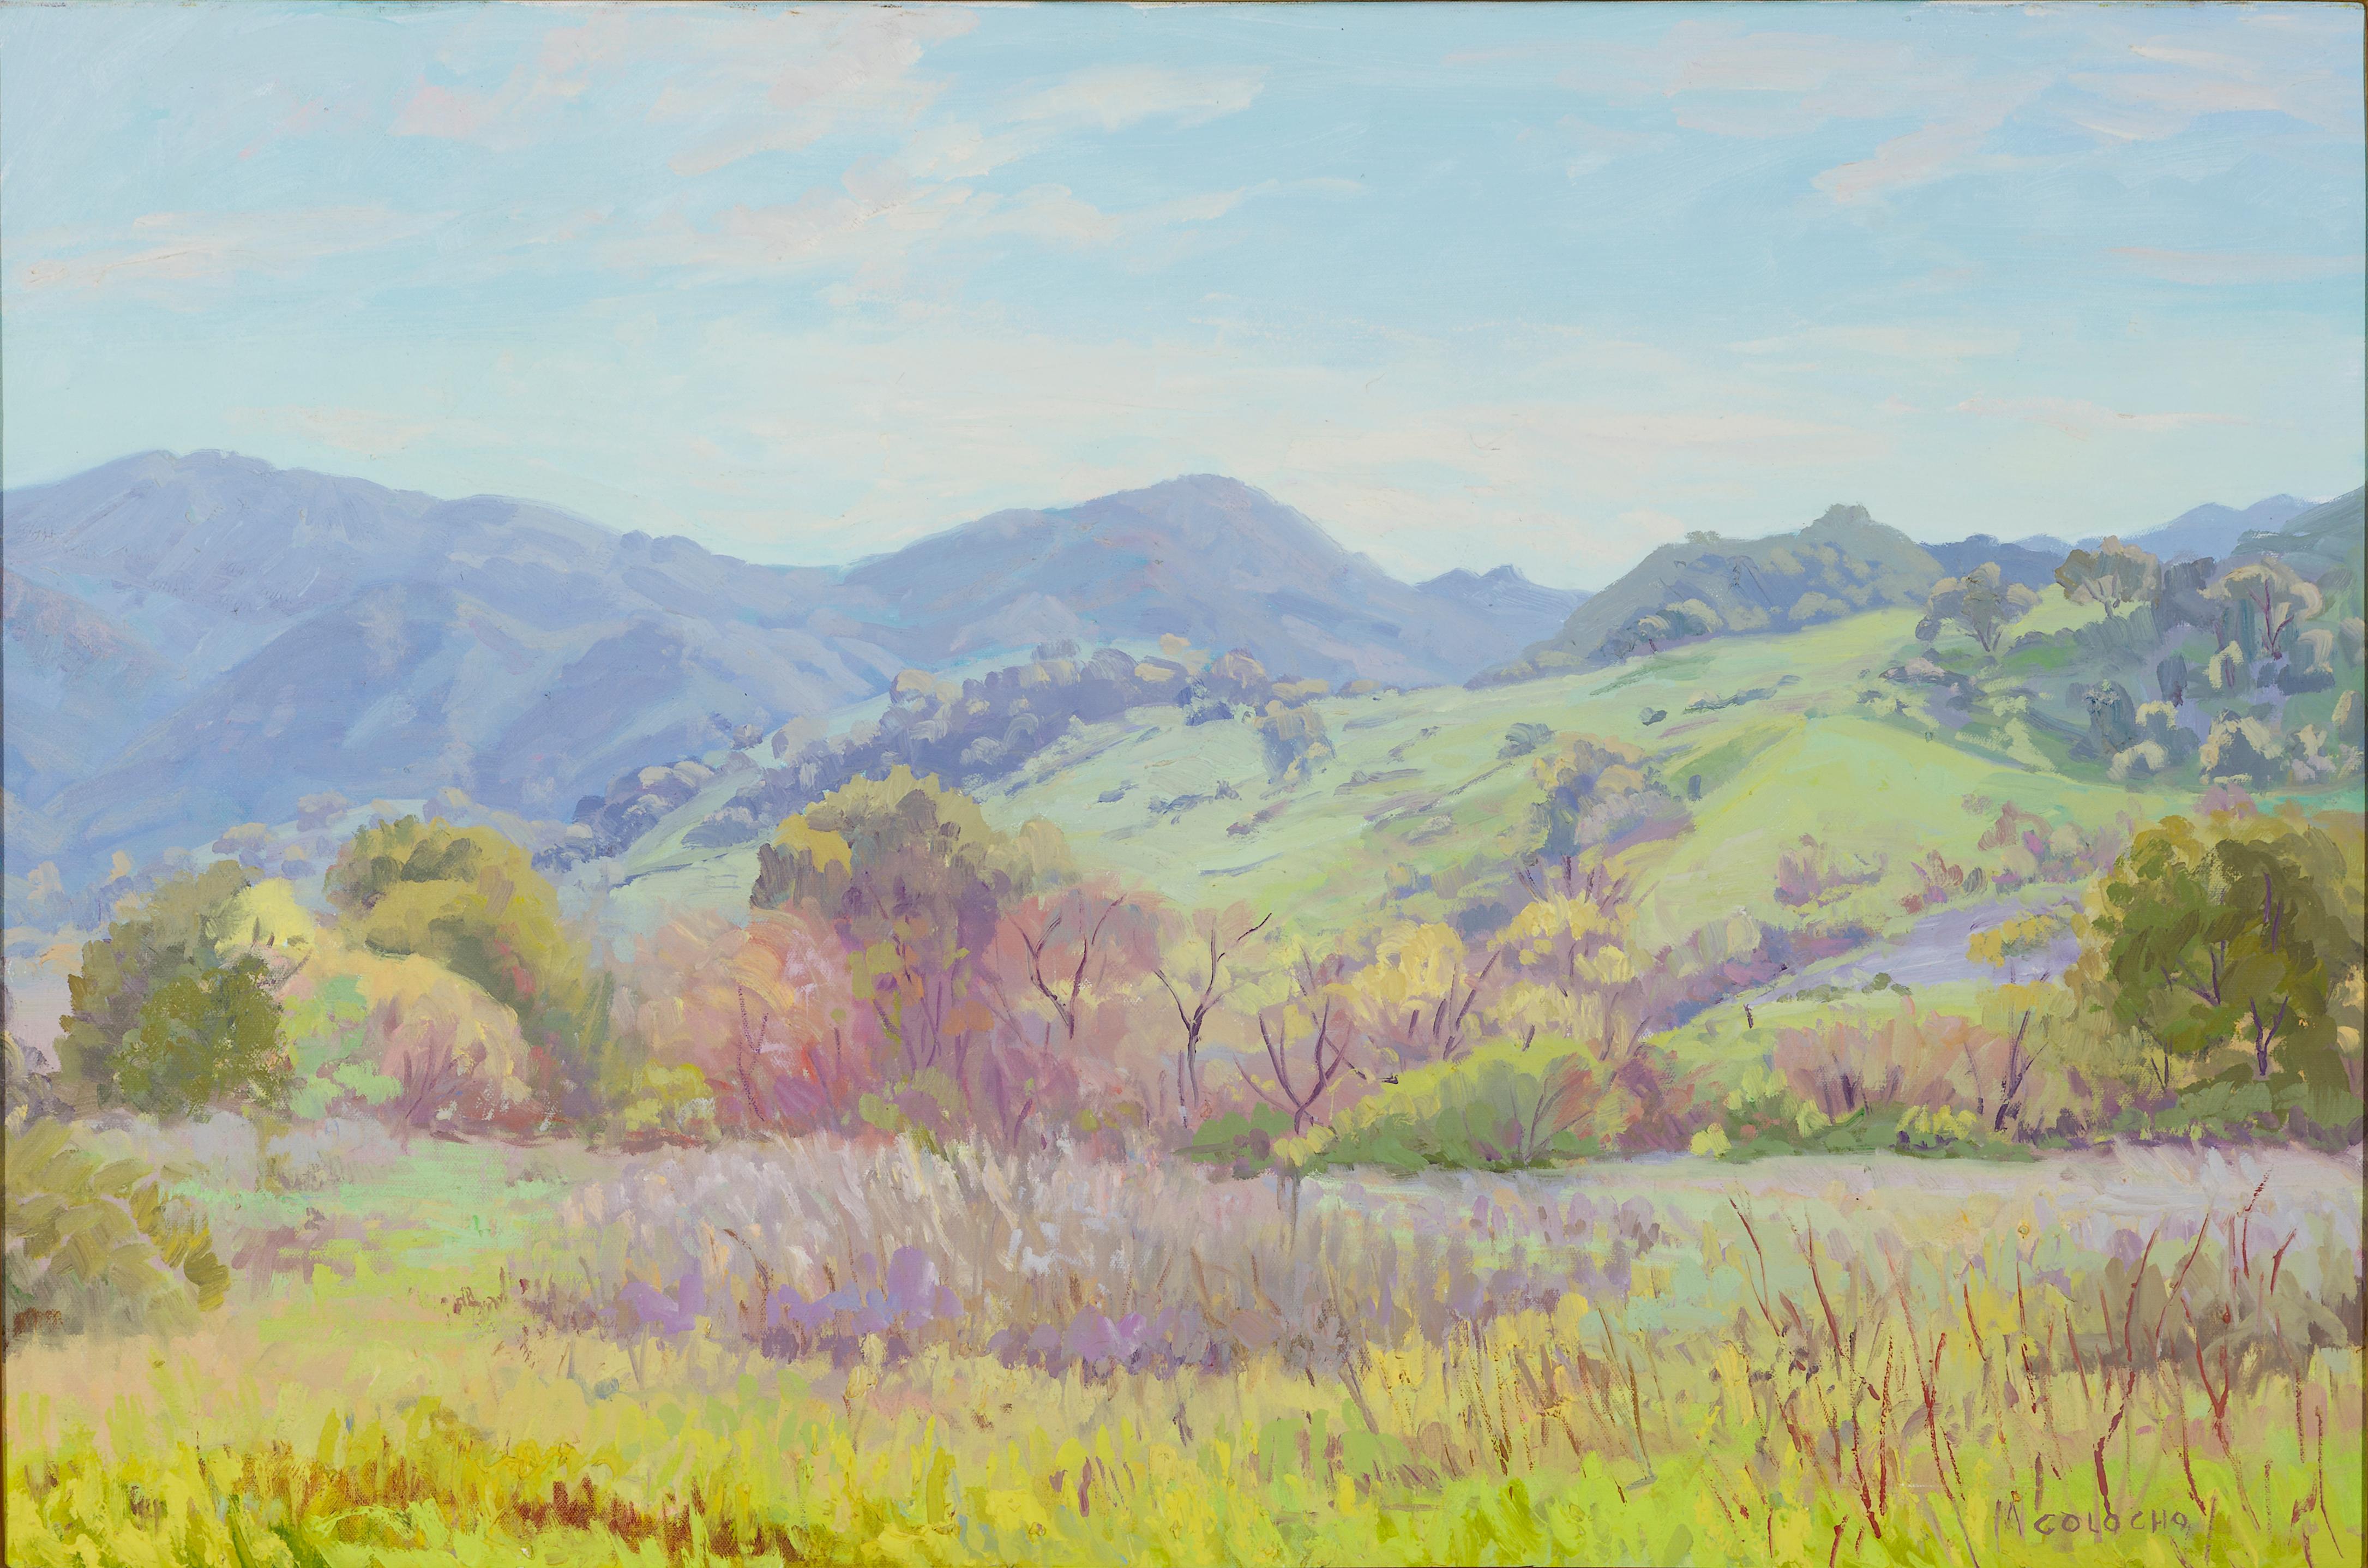 Malibu Mountain, Oil on Canvas , American - Painting by Alfonso Colocho